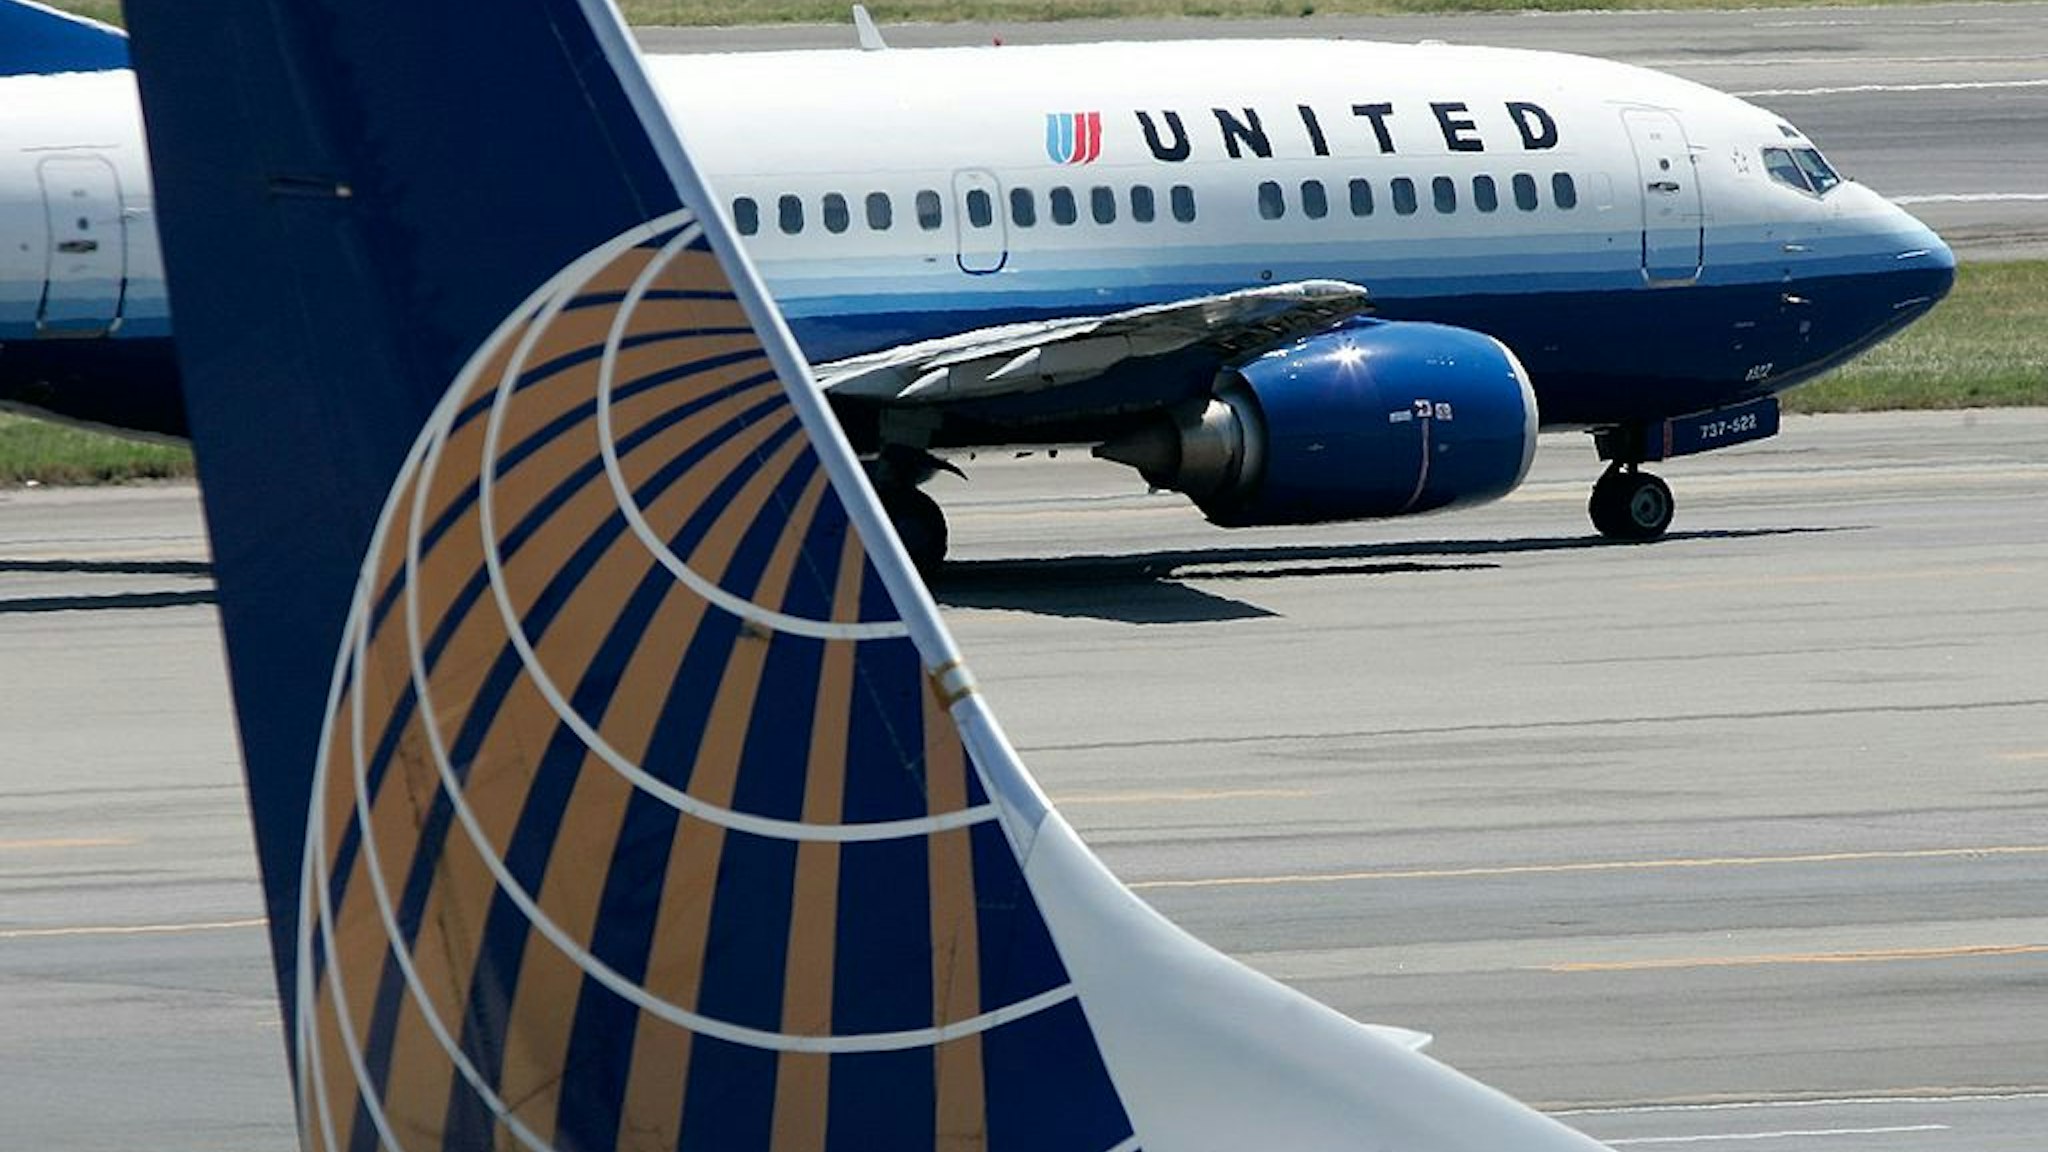 WASHINGTON - AUGUST 16: A United Airlines aircraft passes by a Continental Airlines aircraft as it taxis to takeoff from the runway of Ronald Reagan National Airport August 16, 2006 in Washington, DC. (Photo by Alex Wong/Getty Images)